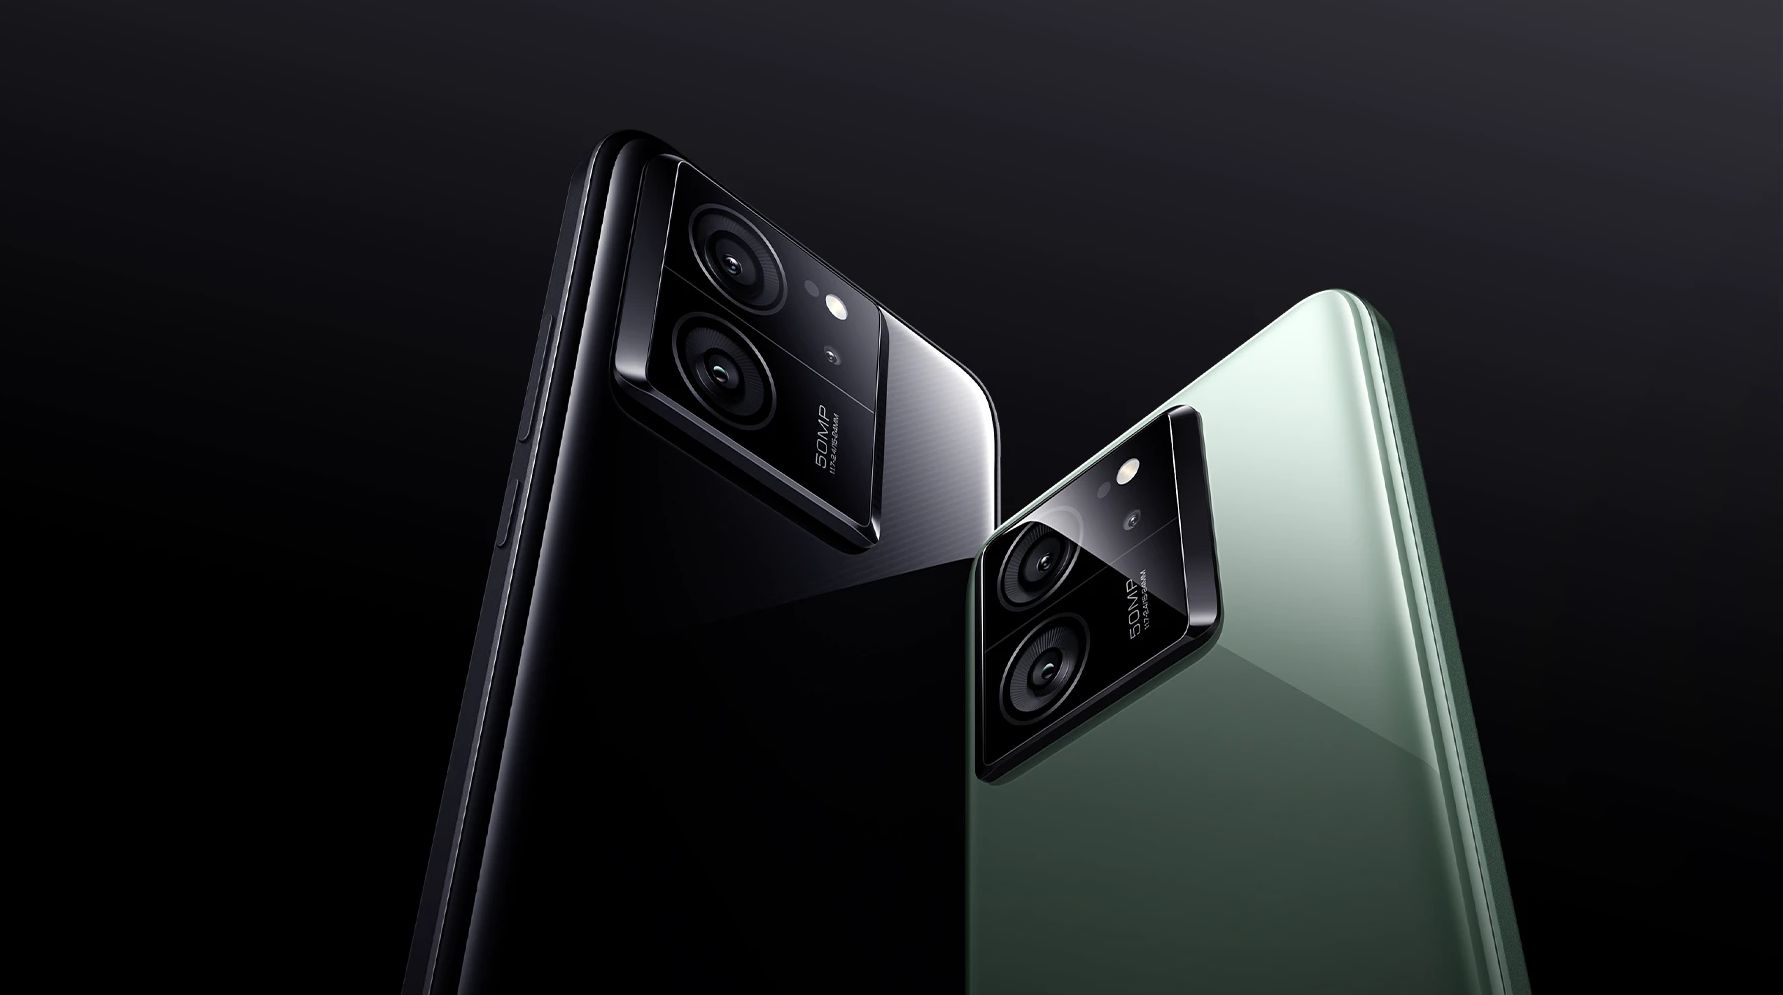 Introducing the Xiaomi 13T and Xiaomi 13T Pro: Everything You Need to Know